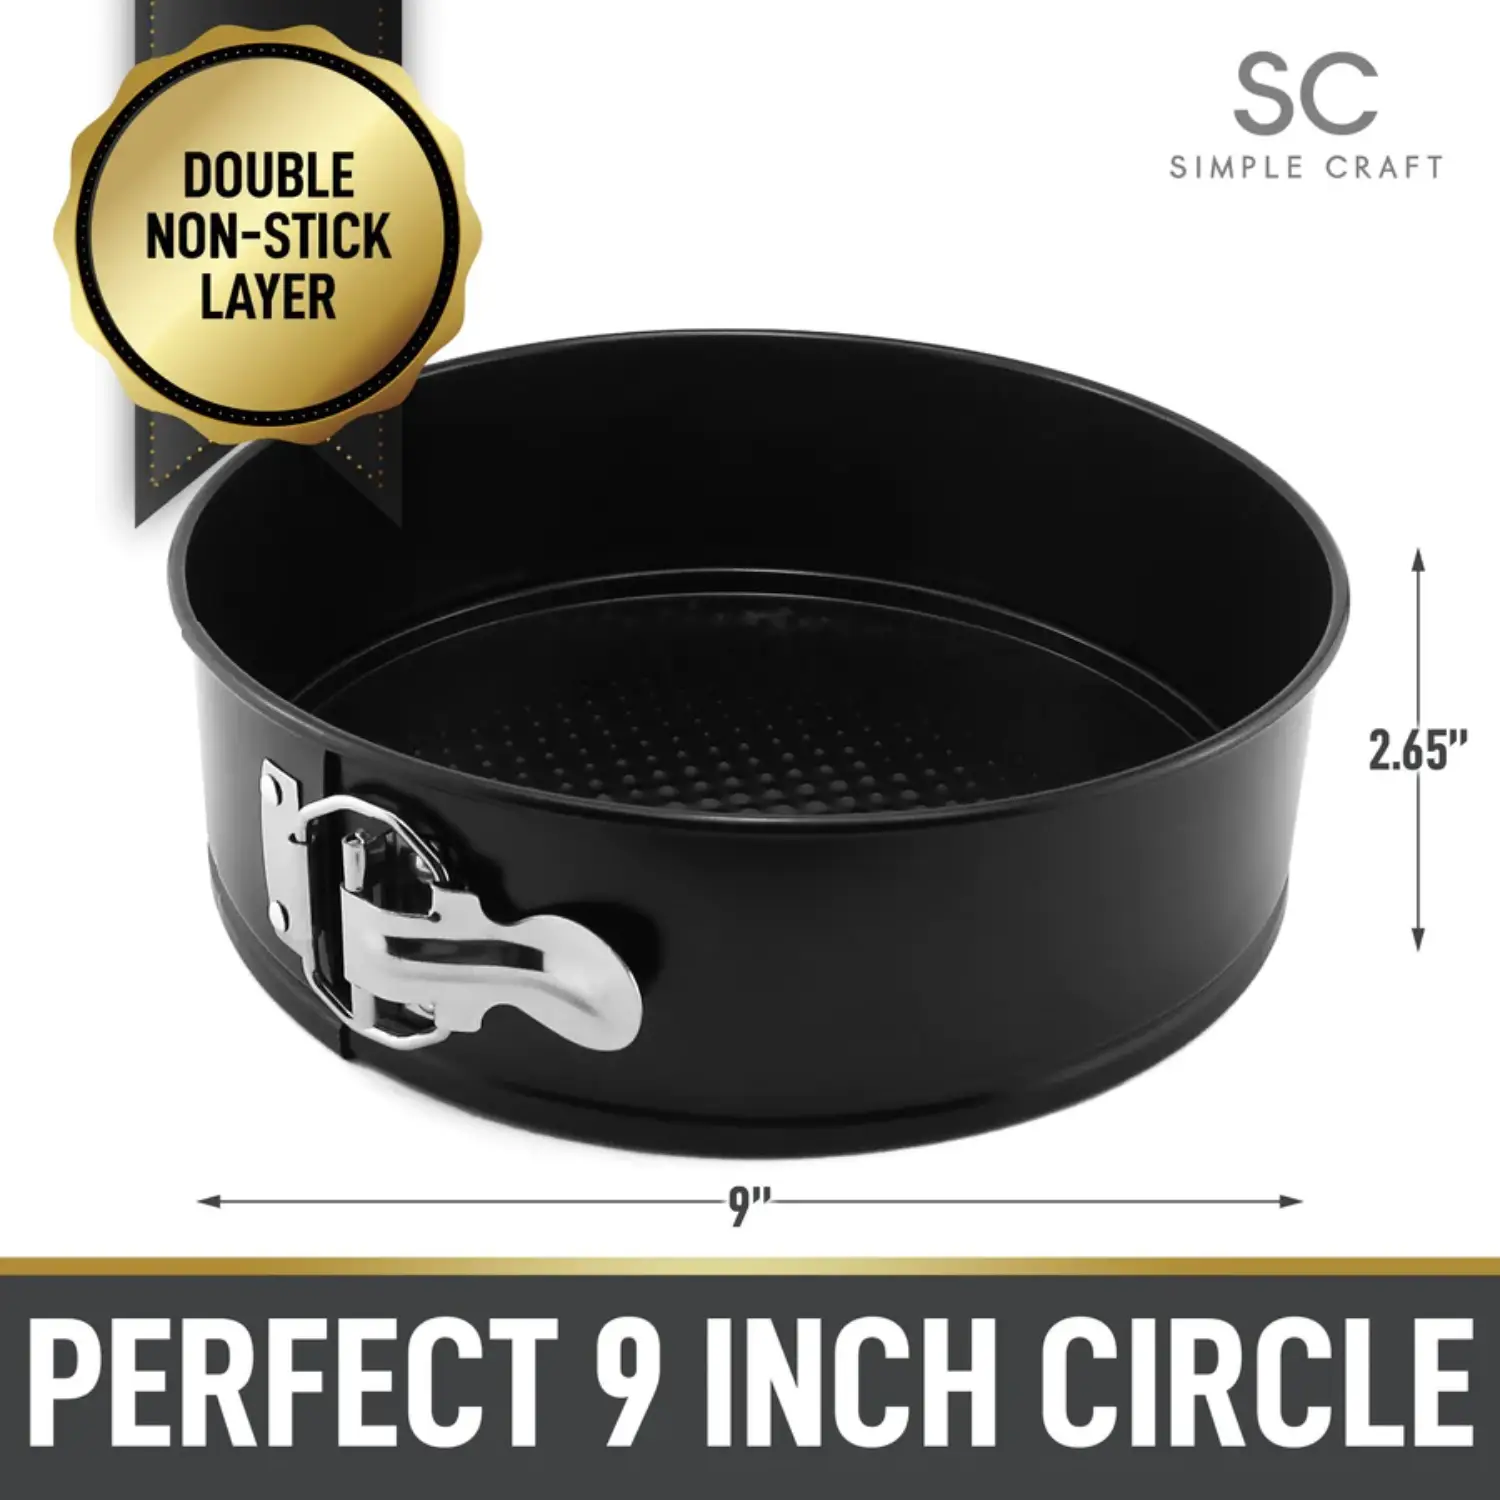 SC Cheesecake Pan -Springform Pan with Safe Non-Stick Coating - 9 inch 